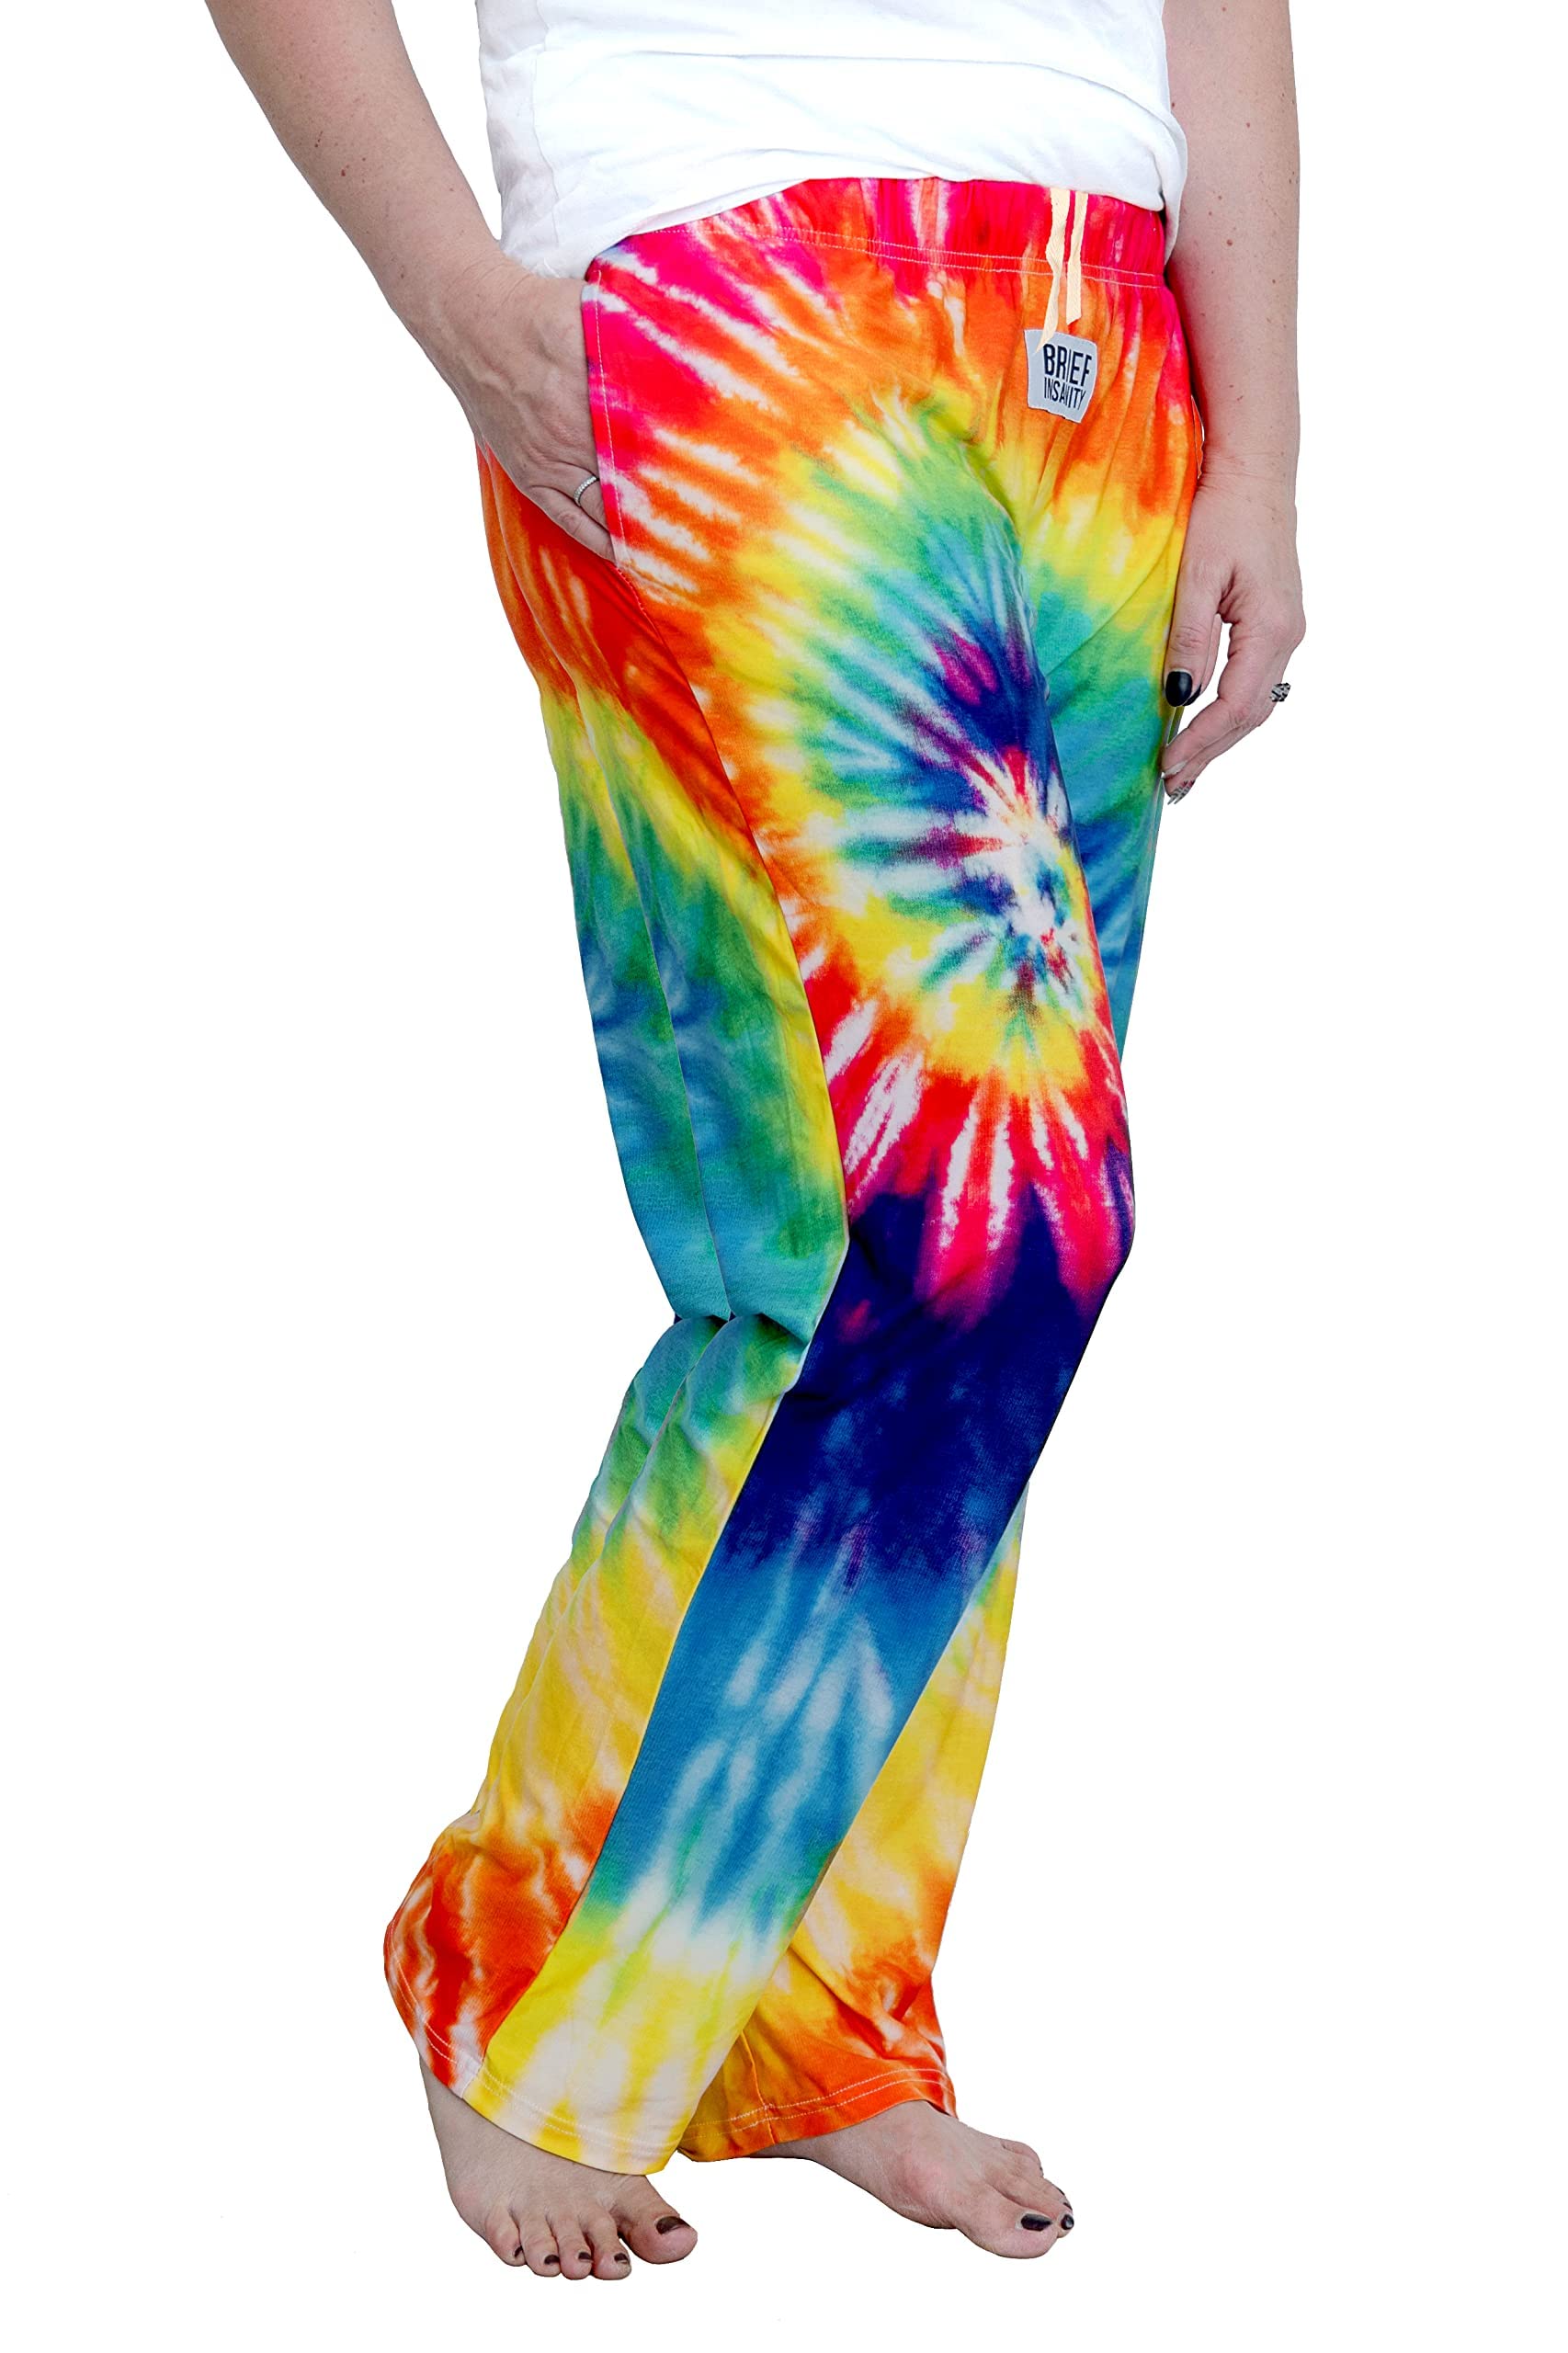 Waist down photo of model wearing Rainbow Tie-Dye pajama lounge pants front/side view #1 (white background)